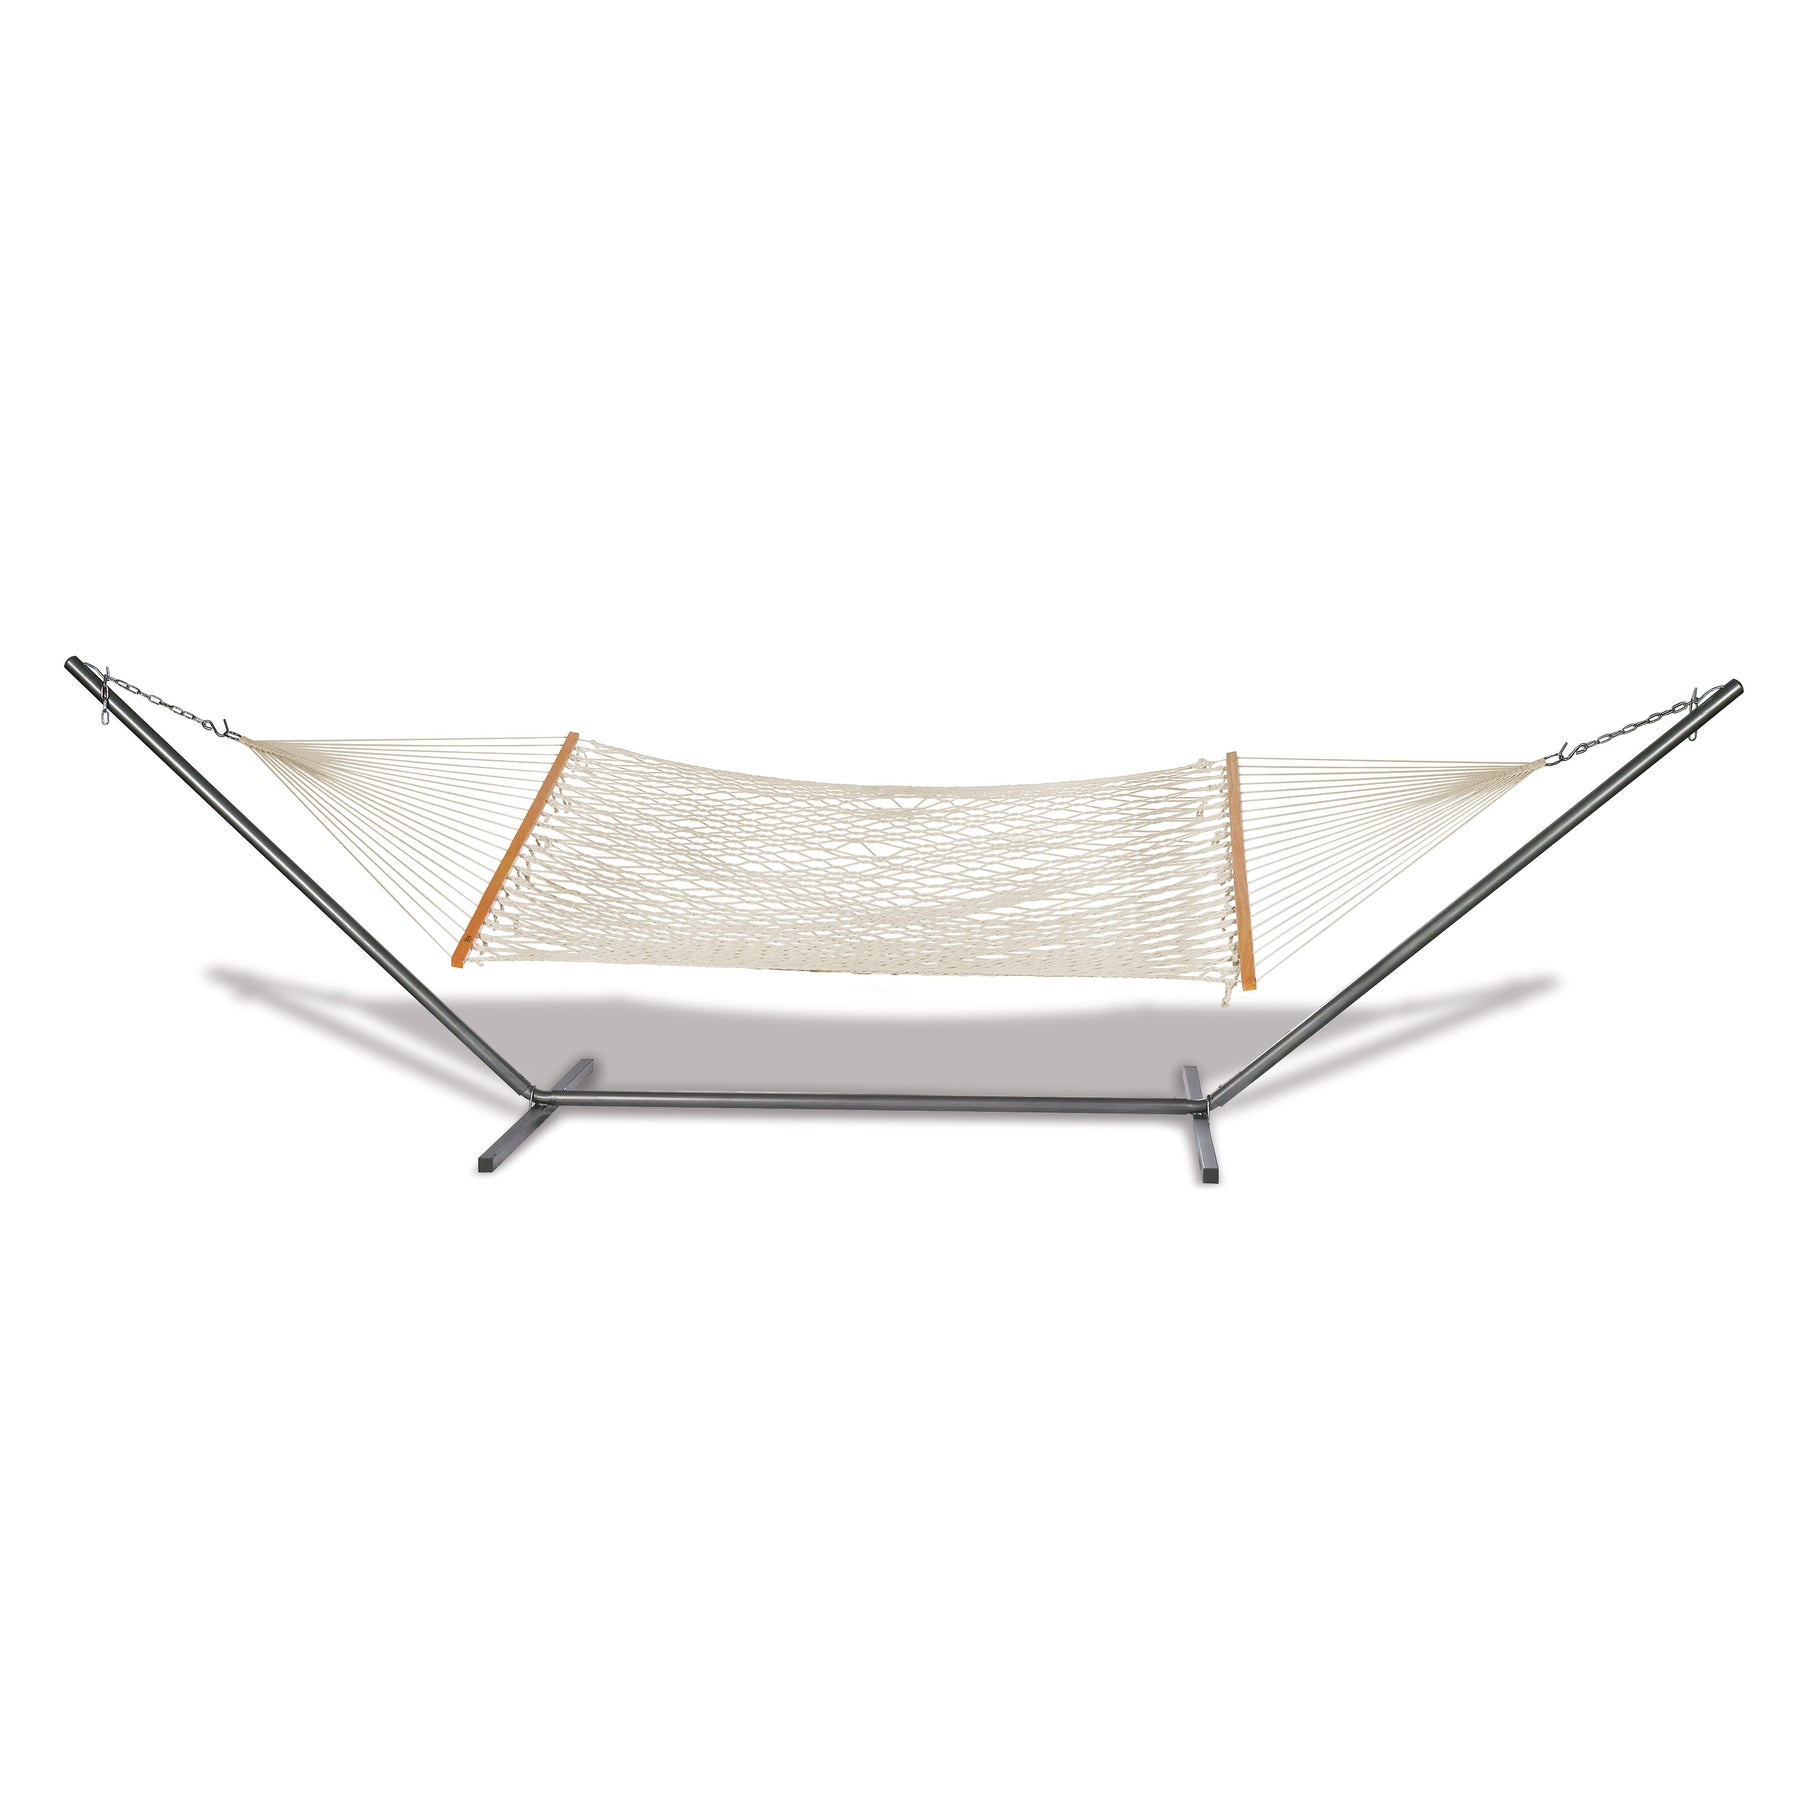 Bliss Hammocks 60-inch Wide Cotton Rope Hammock with Spreader Bar, S Hooks, and Chains in the white variation chained to the Bliss Hammocks 15-foot Hammock Stand with Hanging Hooks in the black variation.